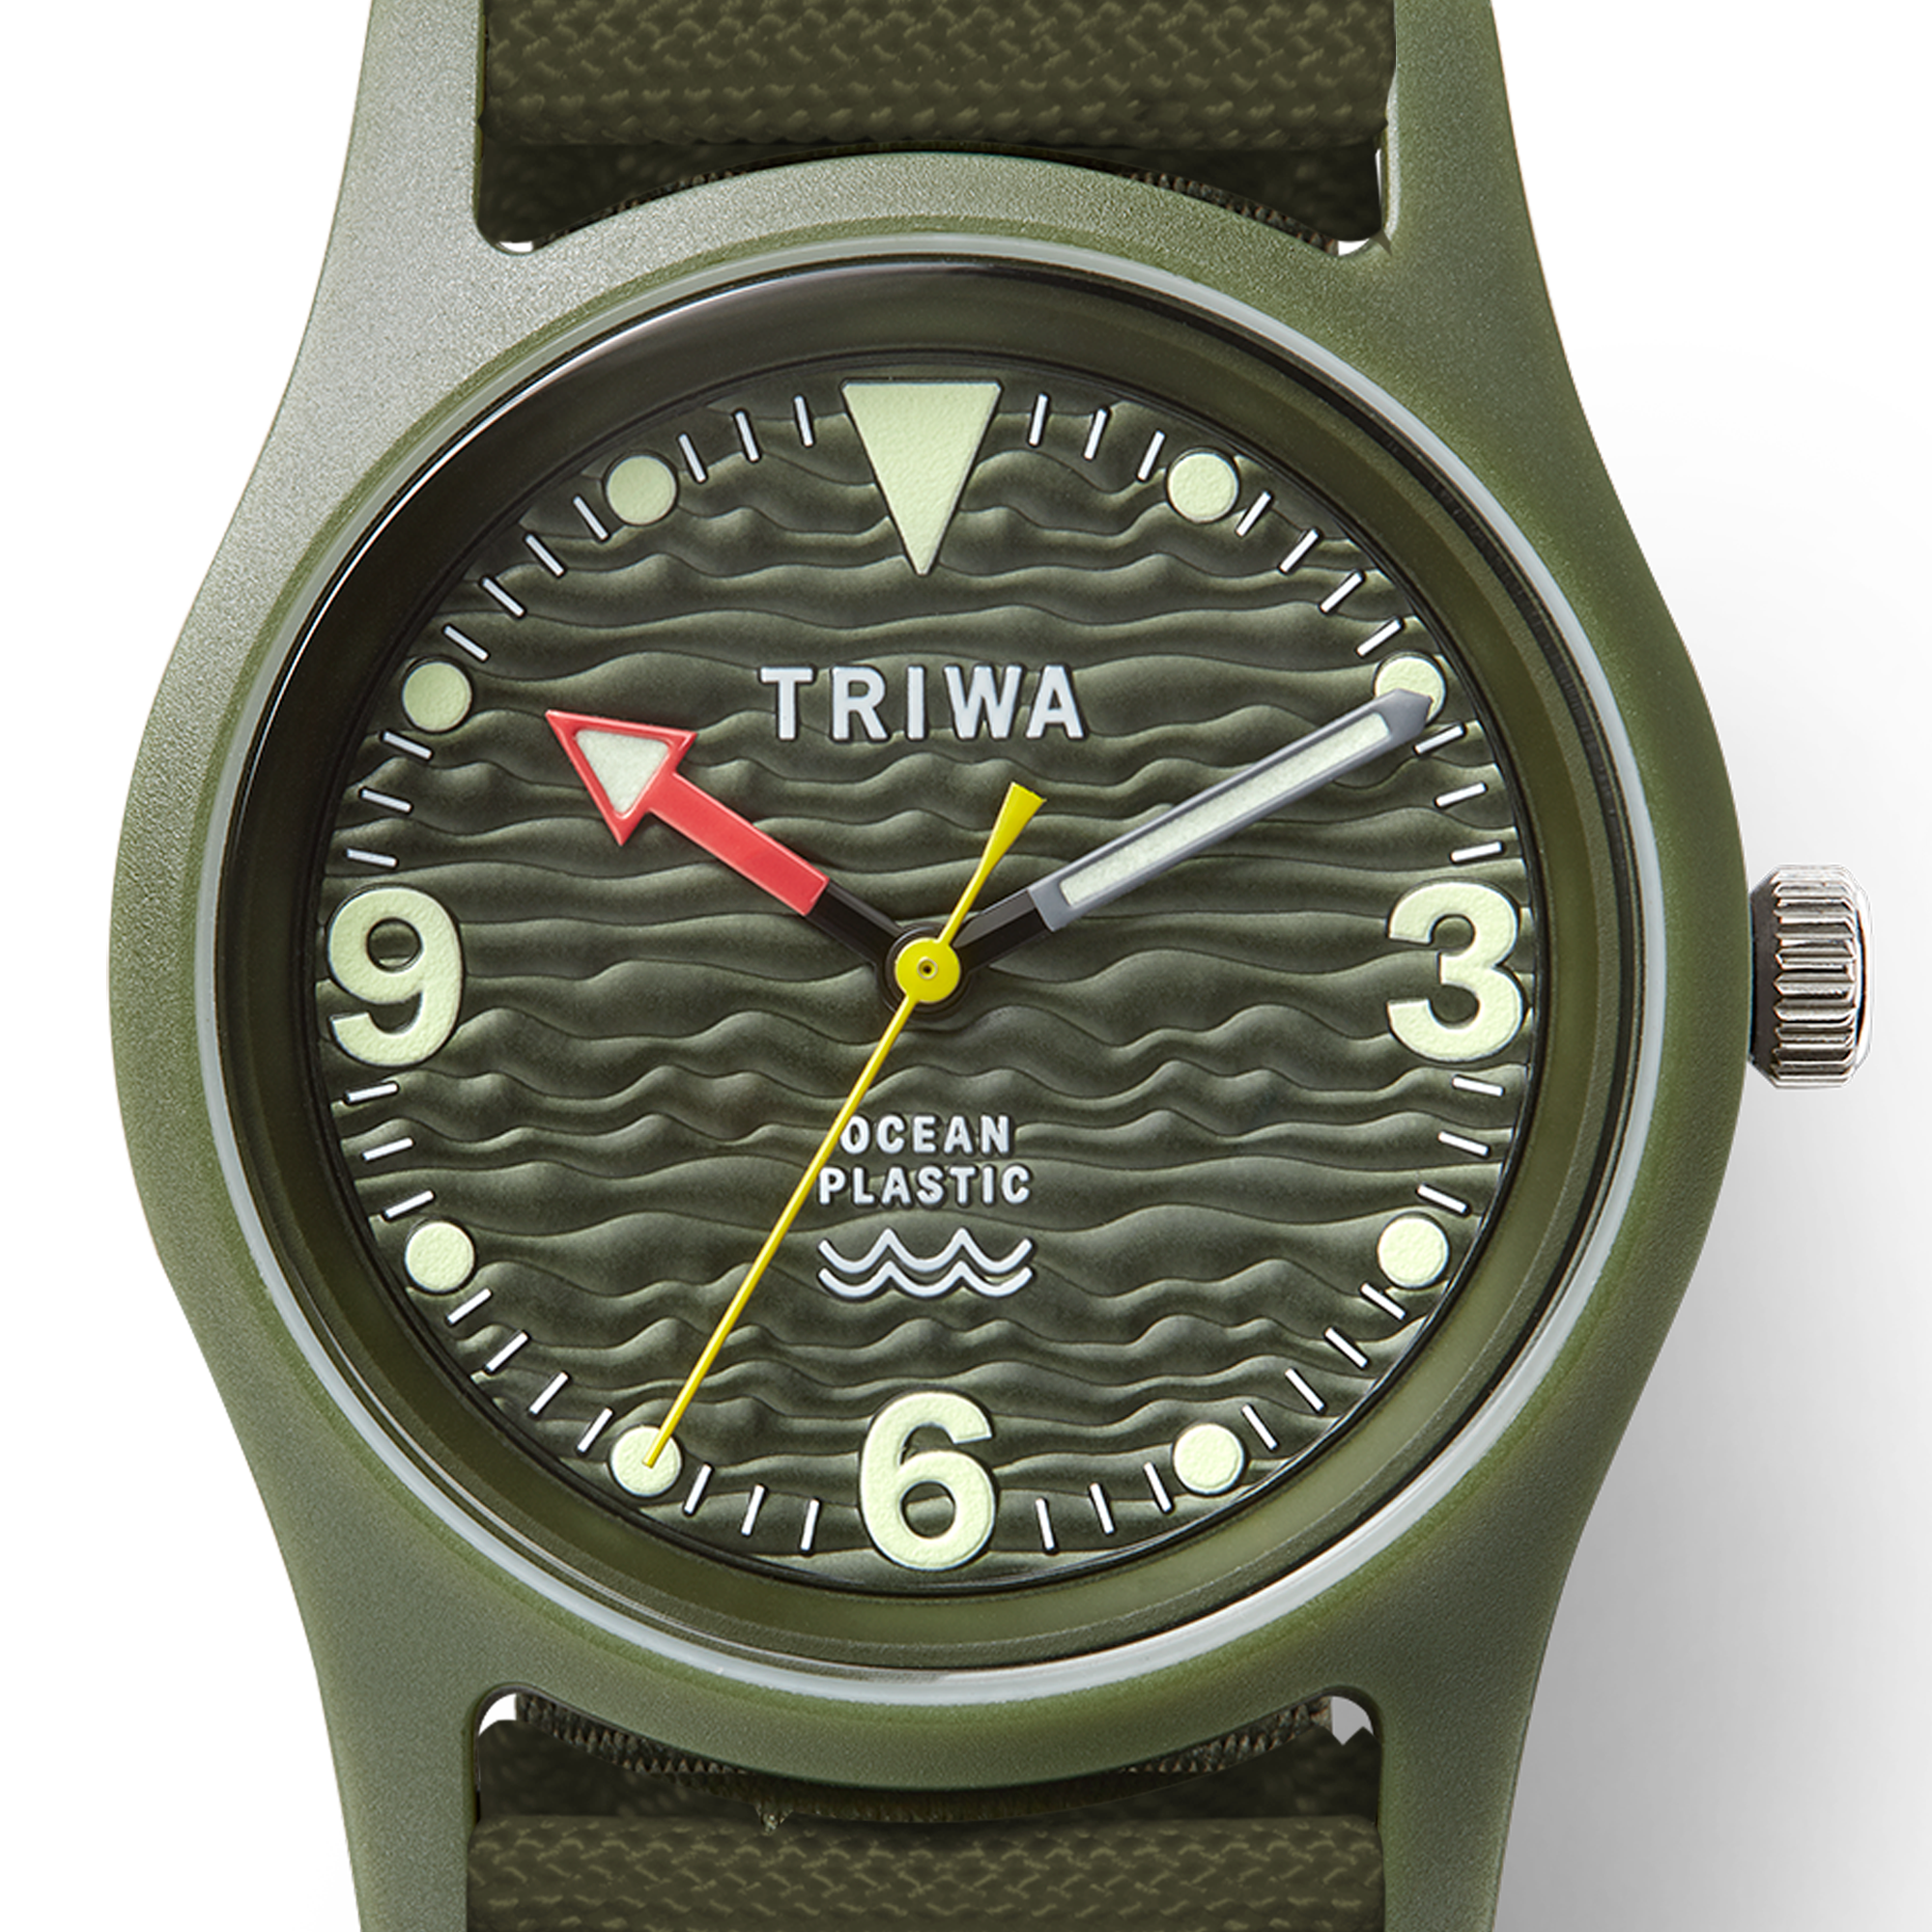 <img src="tapster.png" alt="Contactless- watch triwa seaweed close">